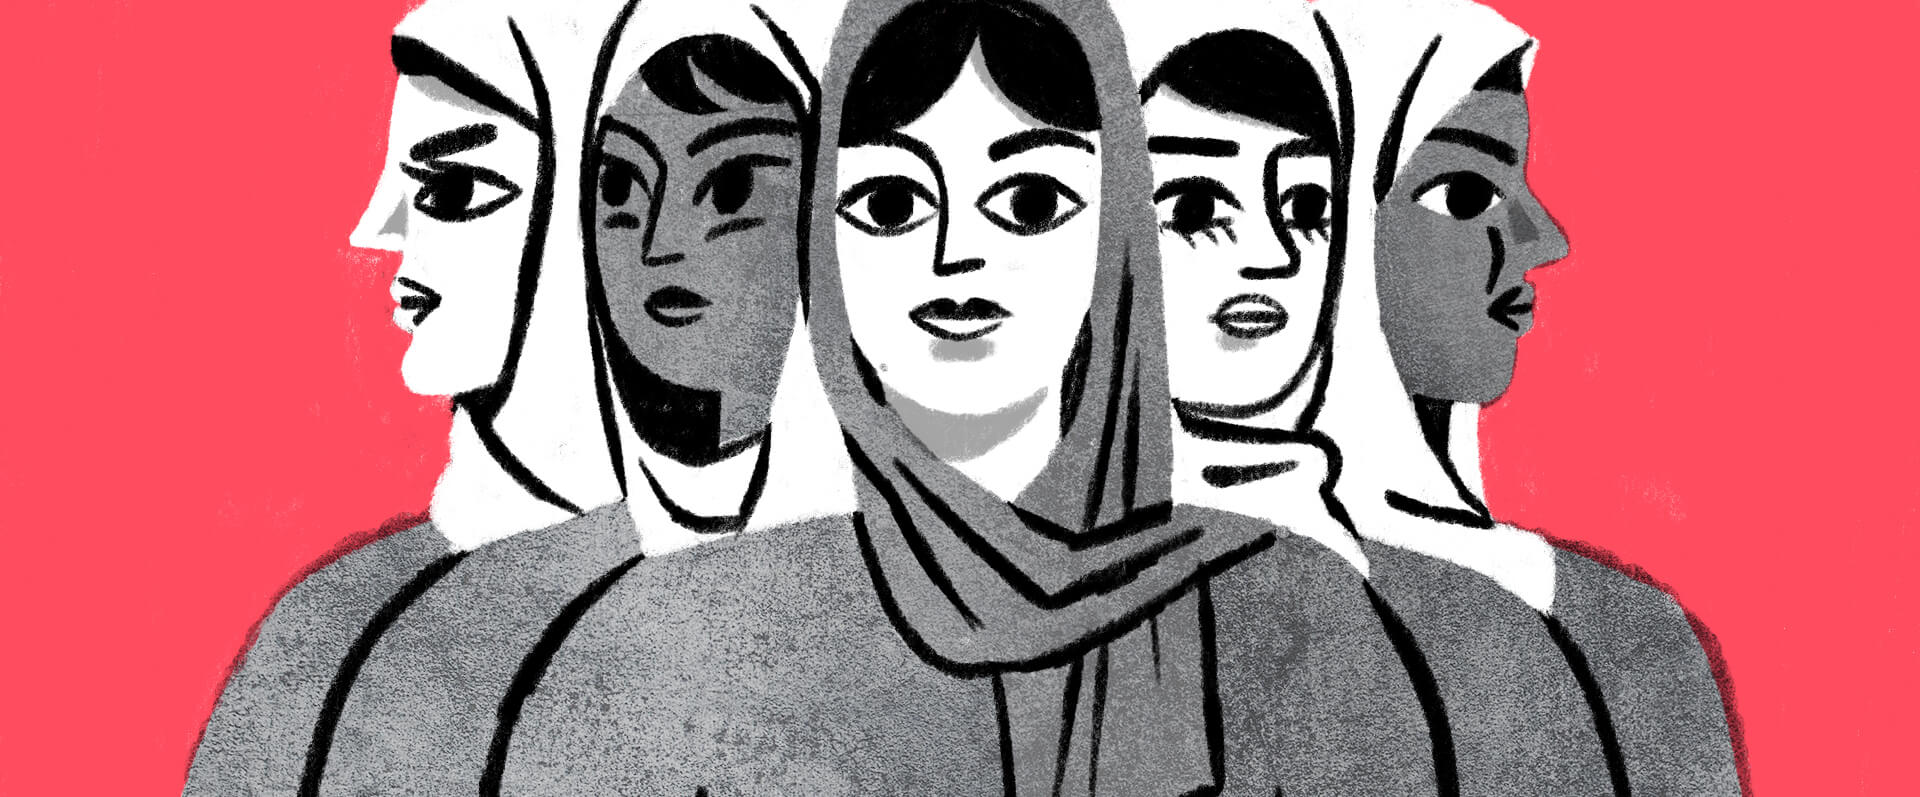 Women in Afghanistan one year into the Taliban takeover - general women illustration. Illustrator: Anina Takeff.